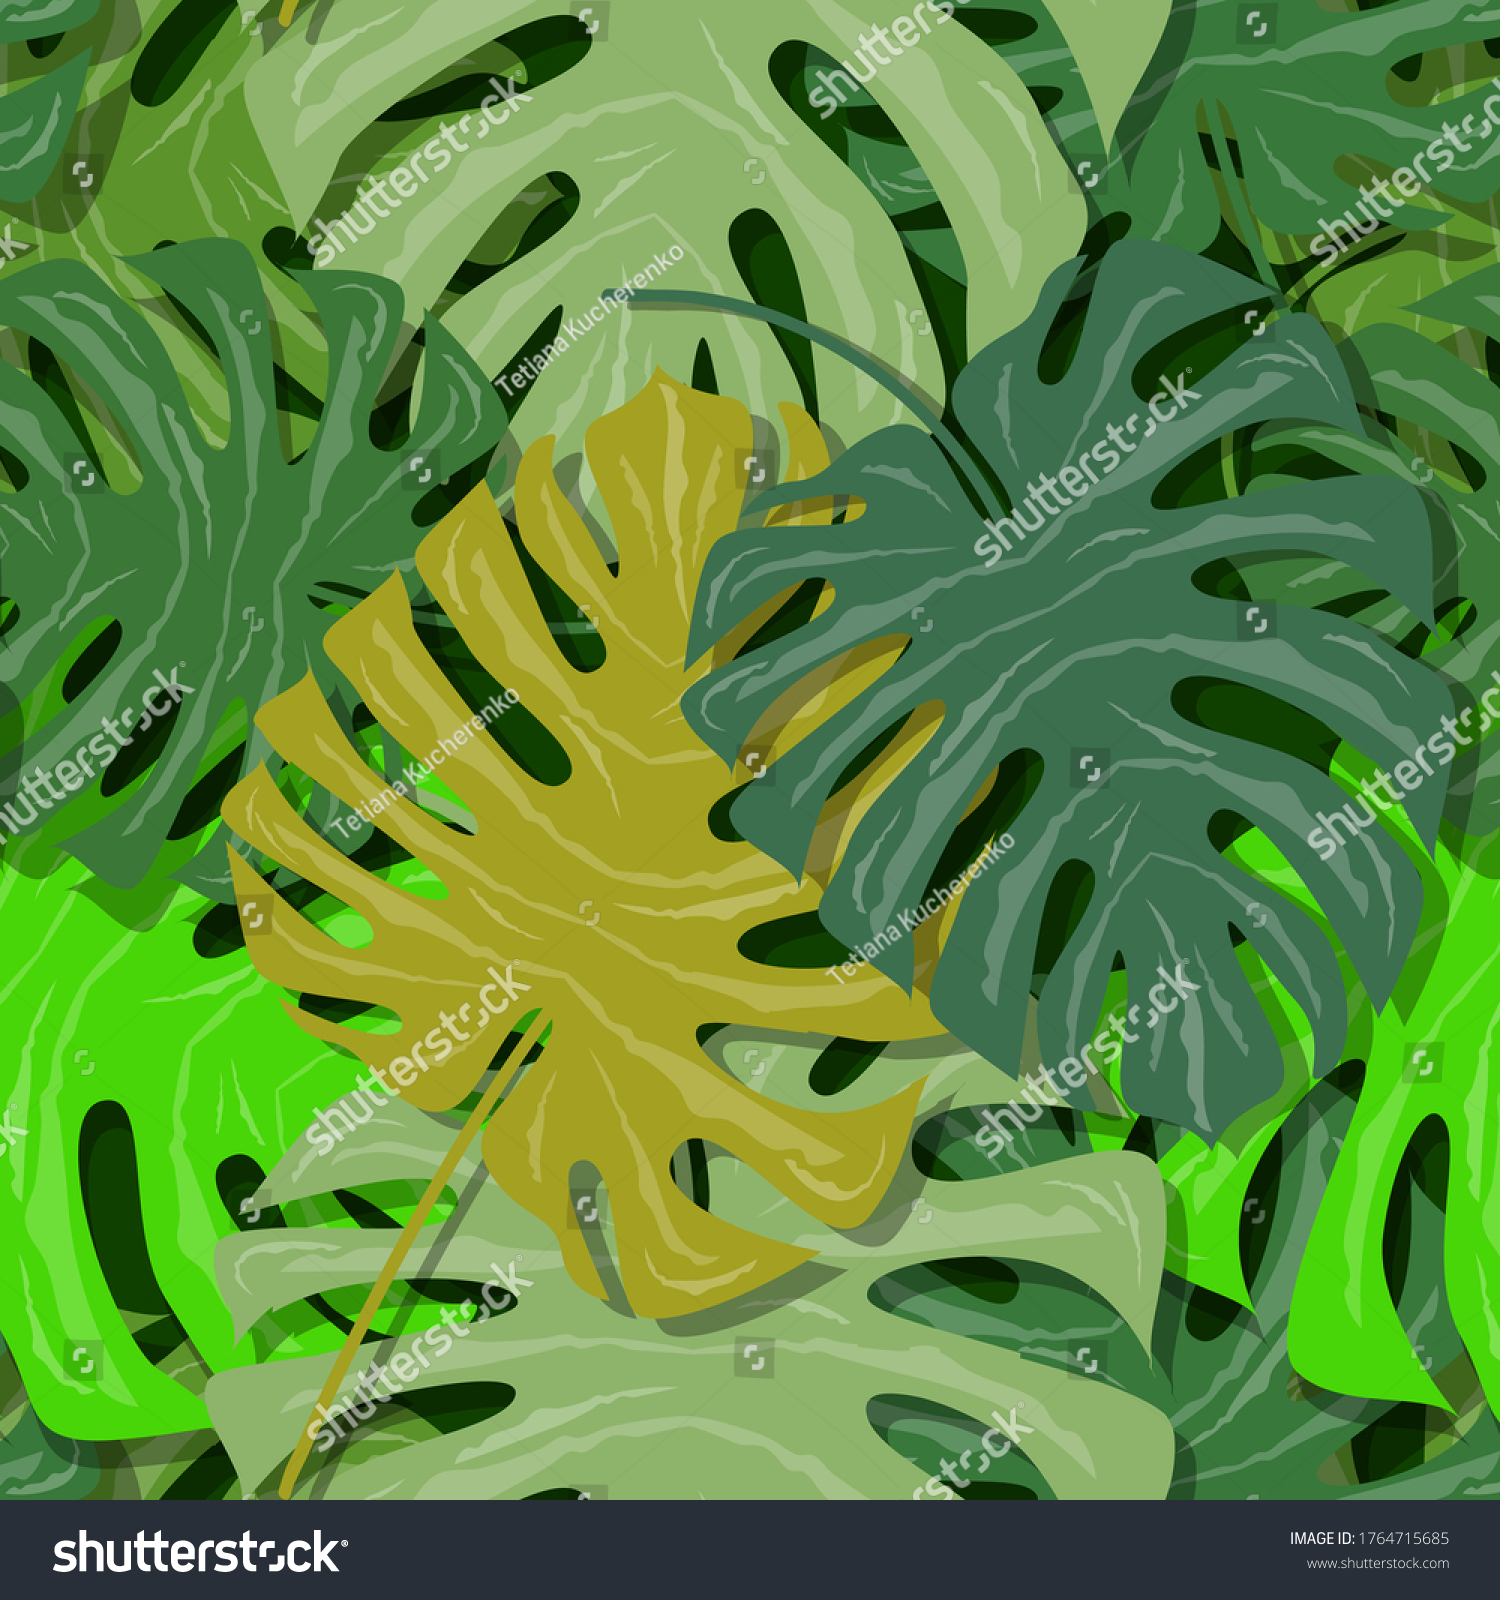 Green Leaves Monstera Overlapping Each Other Stock Vector Royalty Free 1764715685 Shutterstock